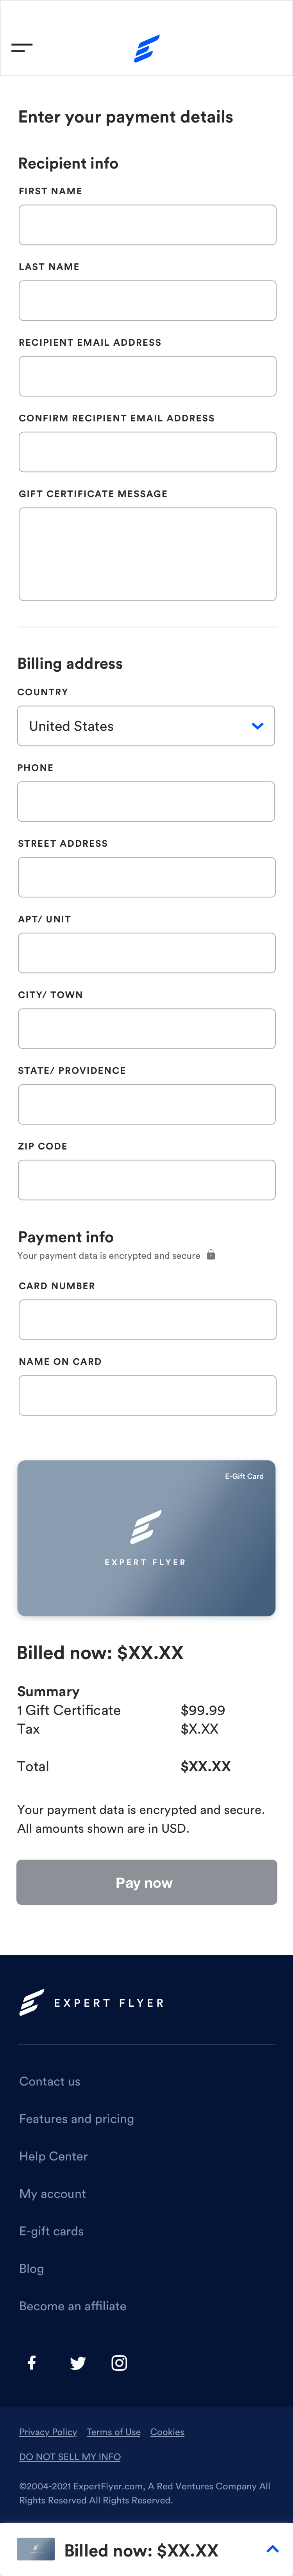 High-fidelity mockup of mobile gift card purchase form